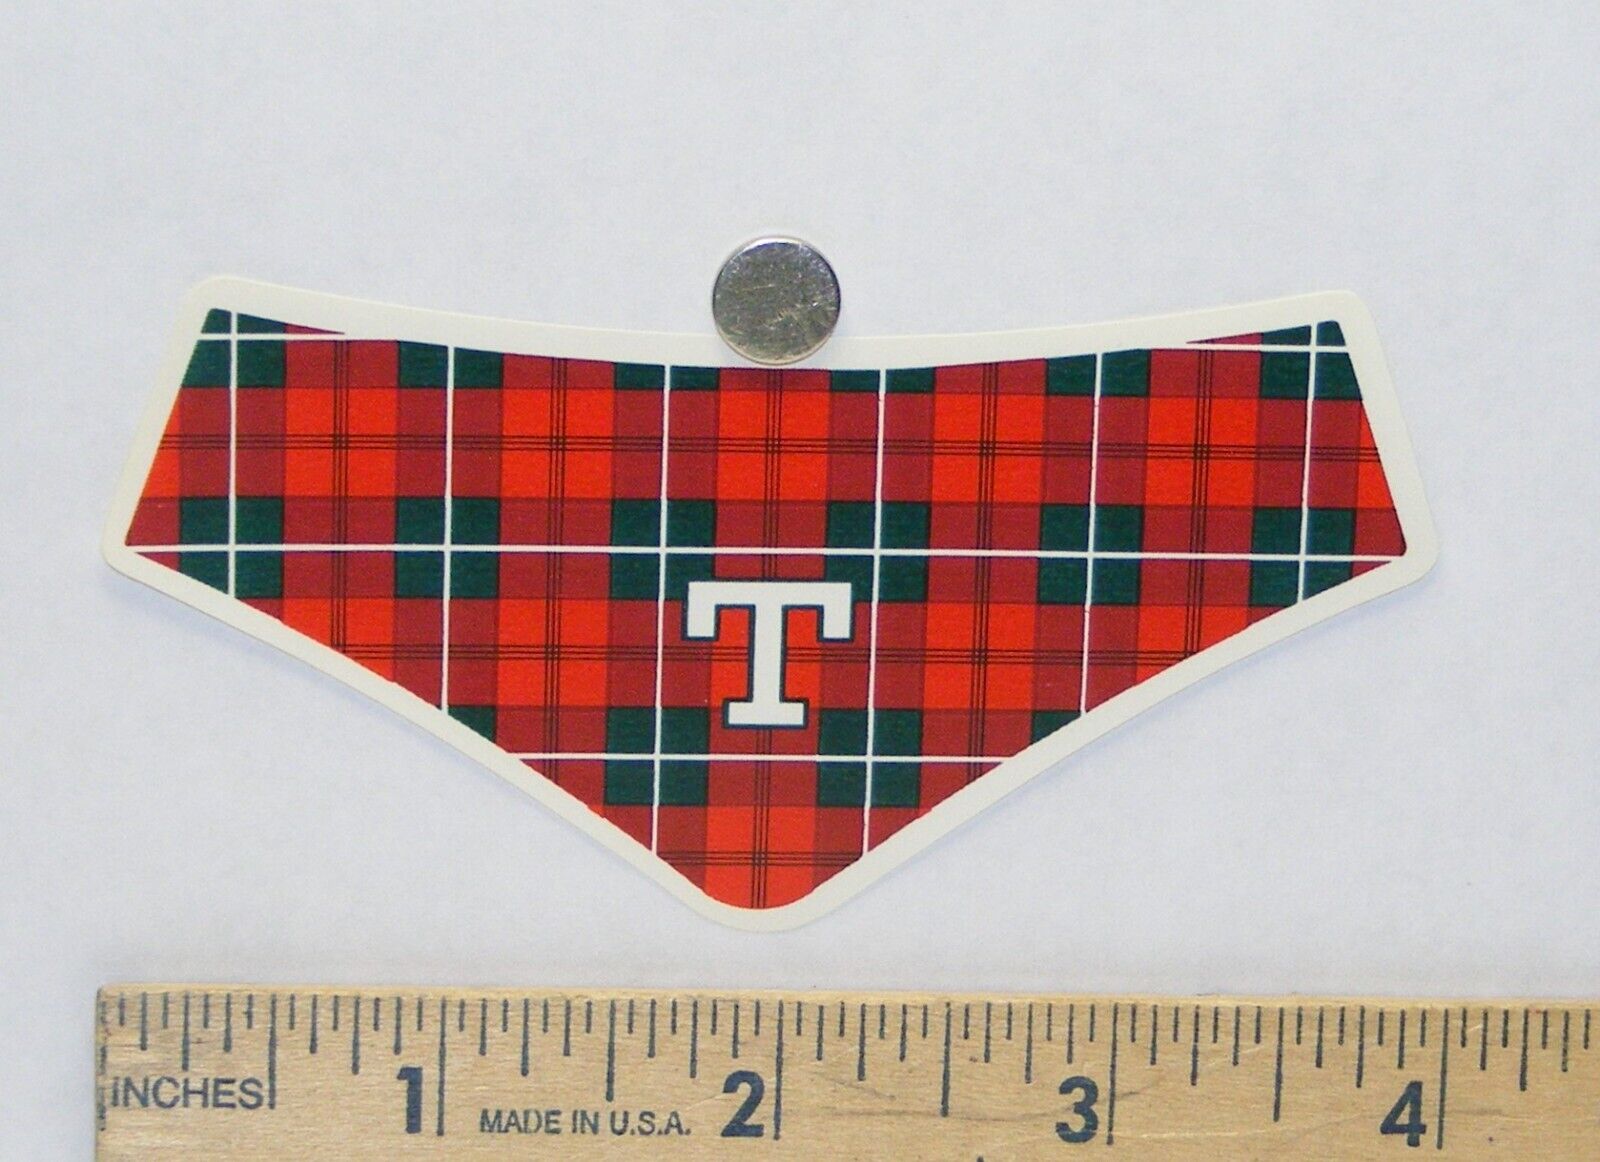 Vintage 1970s Pittsburgh Brewing Company Tech plaid beer bottle neck label